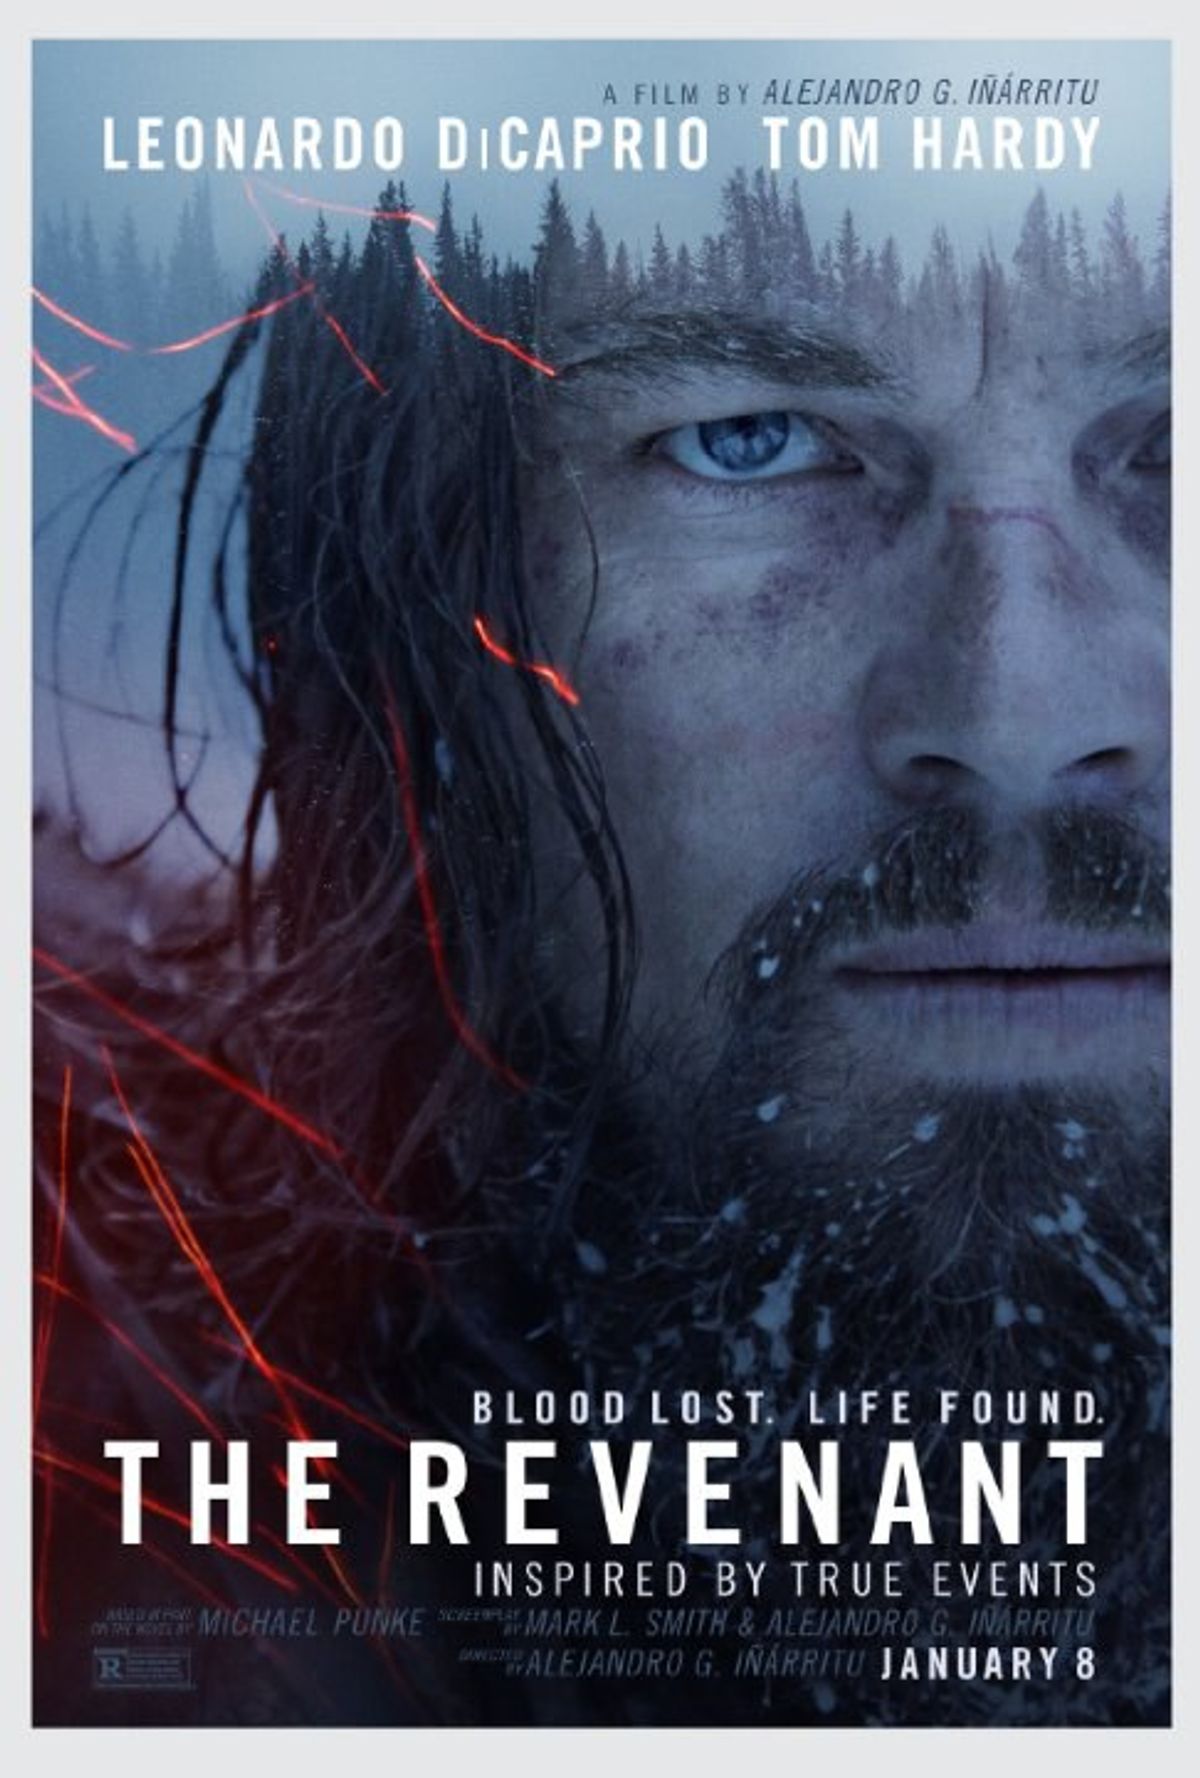 Why 'The Revenant' Shouldn't Have Won Any Academy Awards